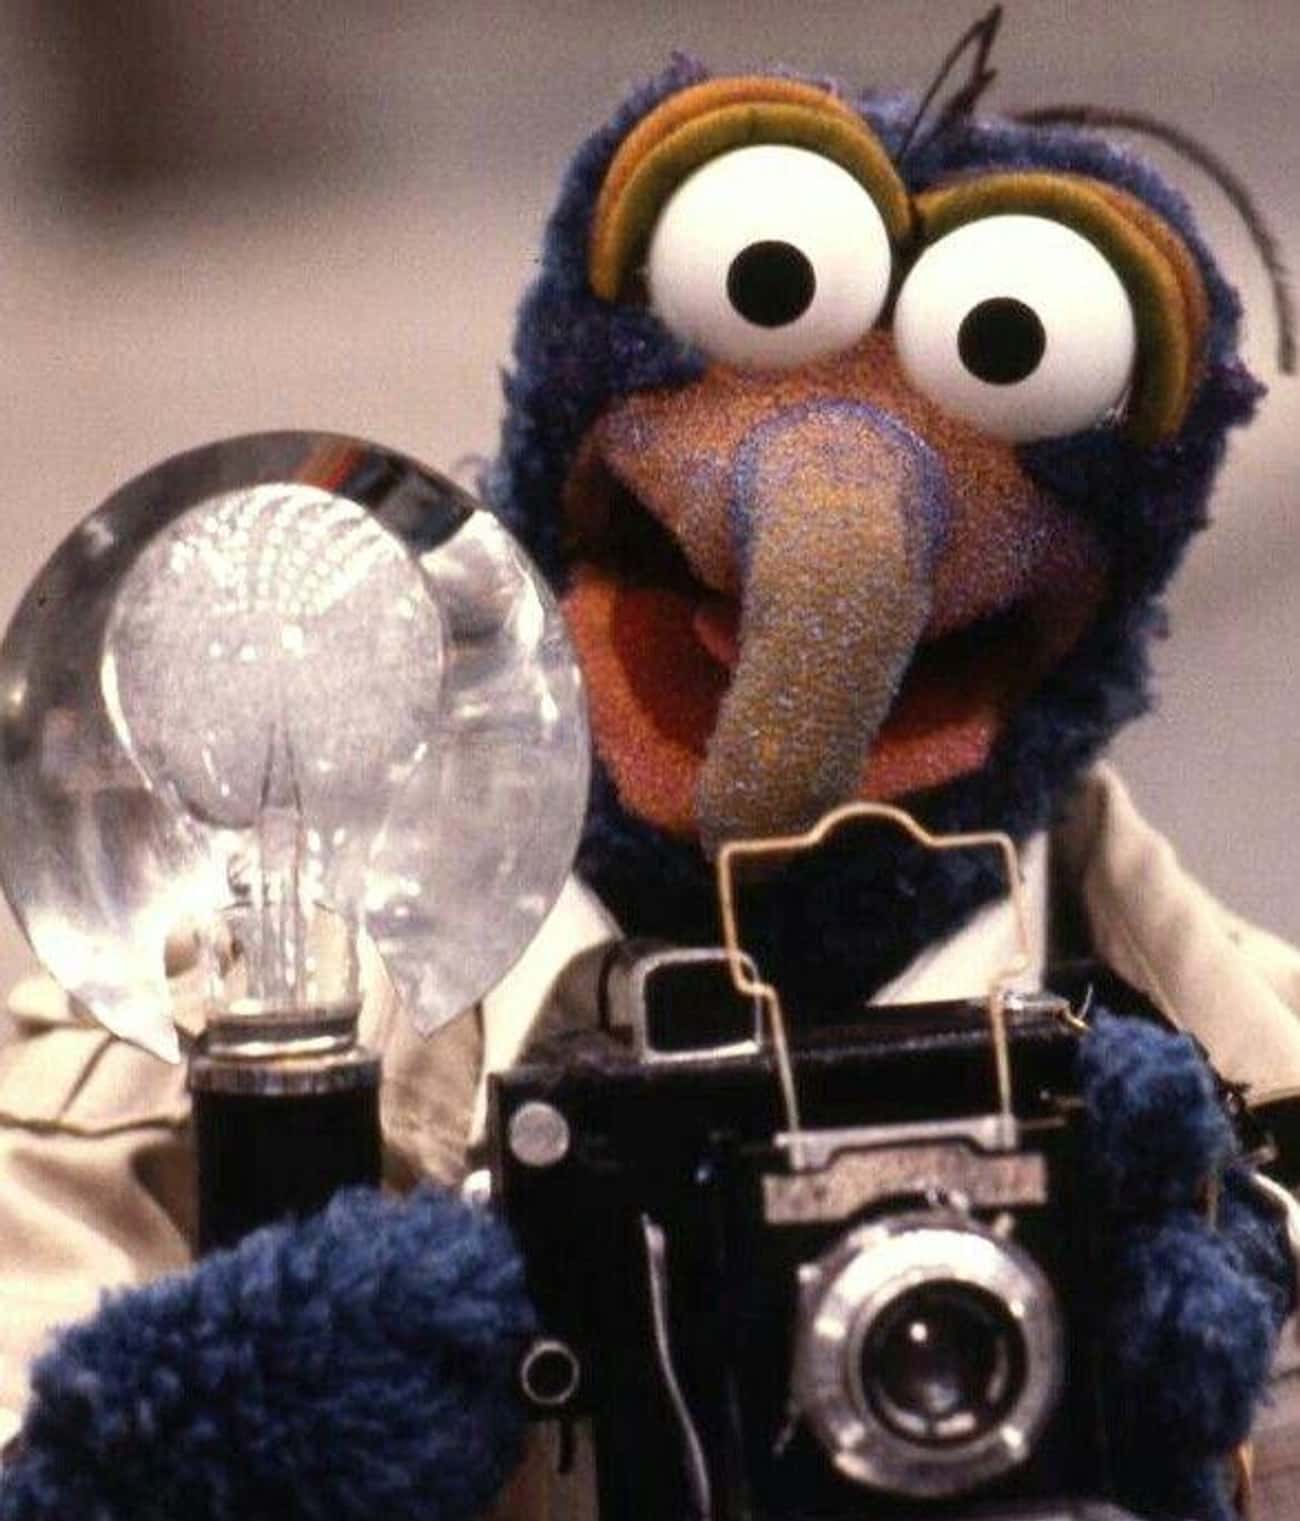 Aries (March 21 - April 19): Gonzo The Great